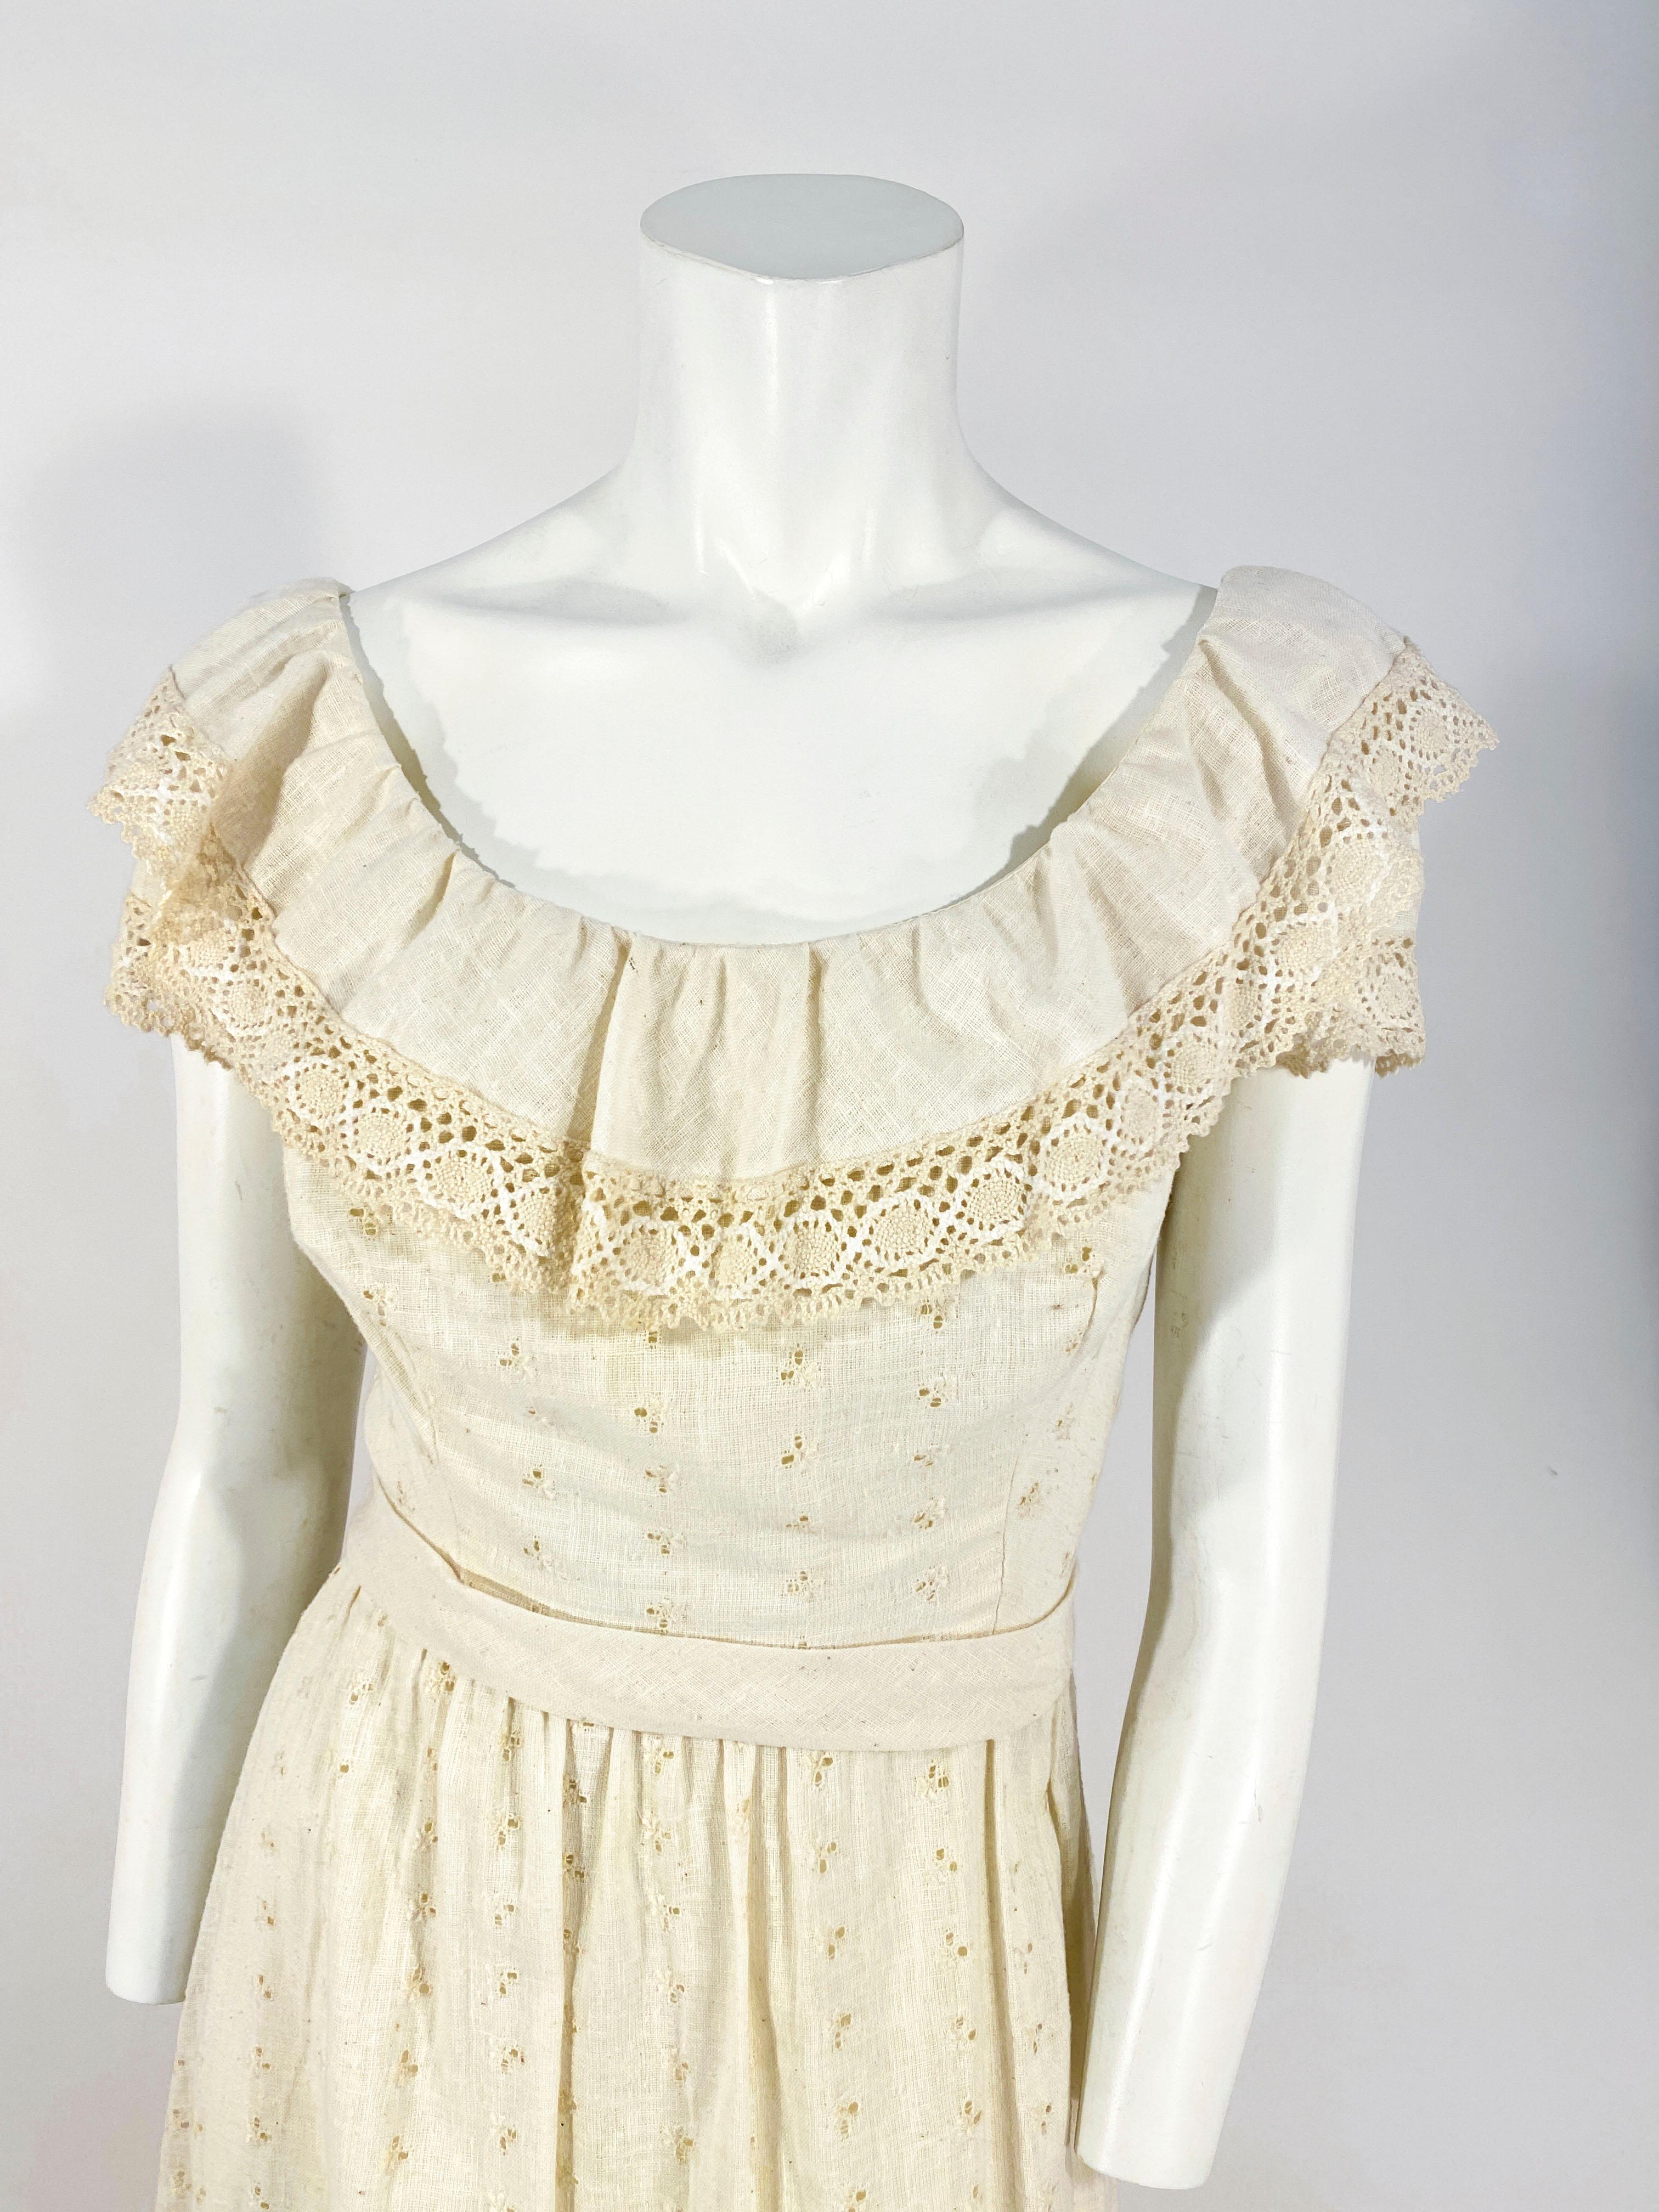 1960s custom made dress with eyelet accents, machine crochet inserts in 4 bands on the skirt, ruffled off-the shoulder neckline, cap lace sleeves, and an applied waistband. The back has a zipper closure.